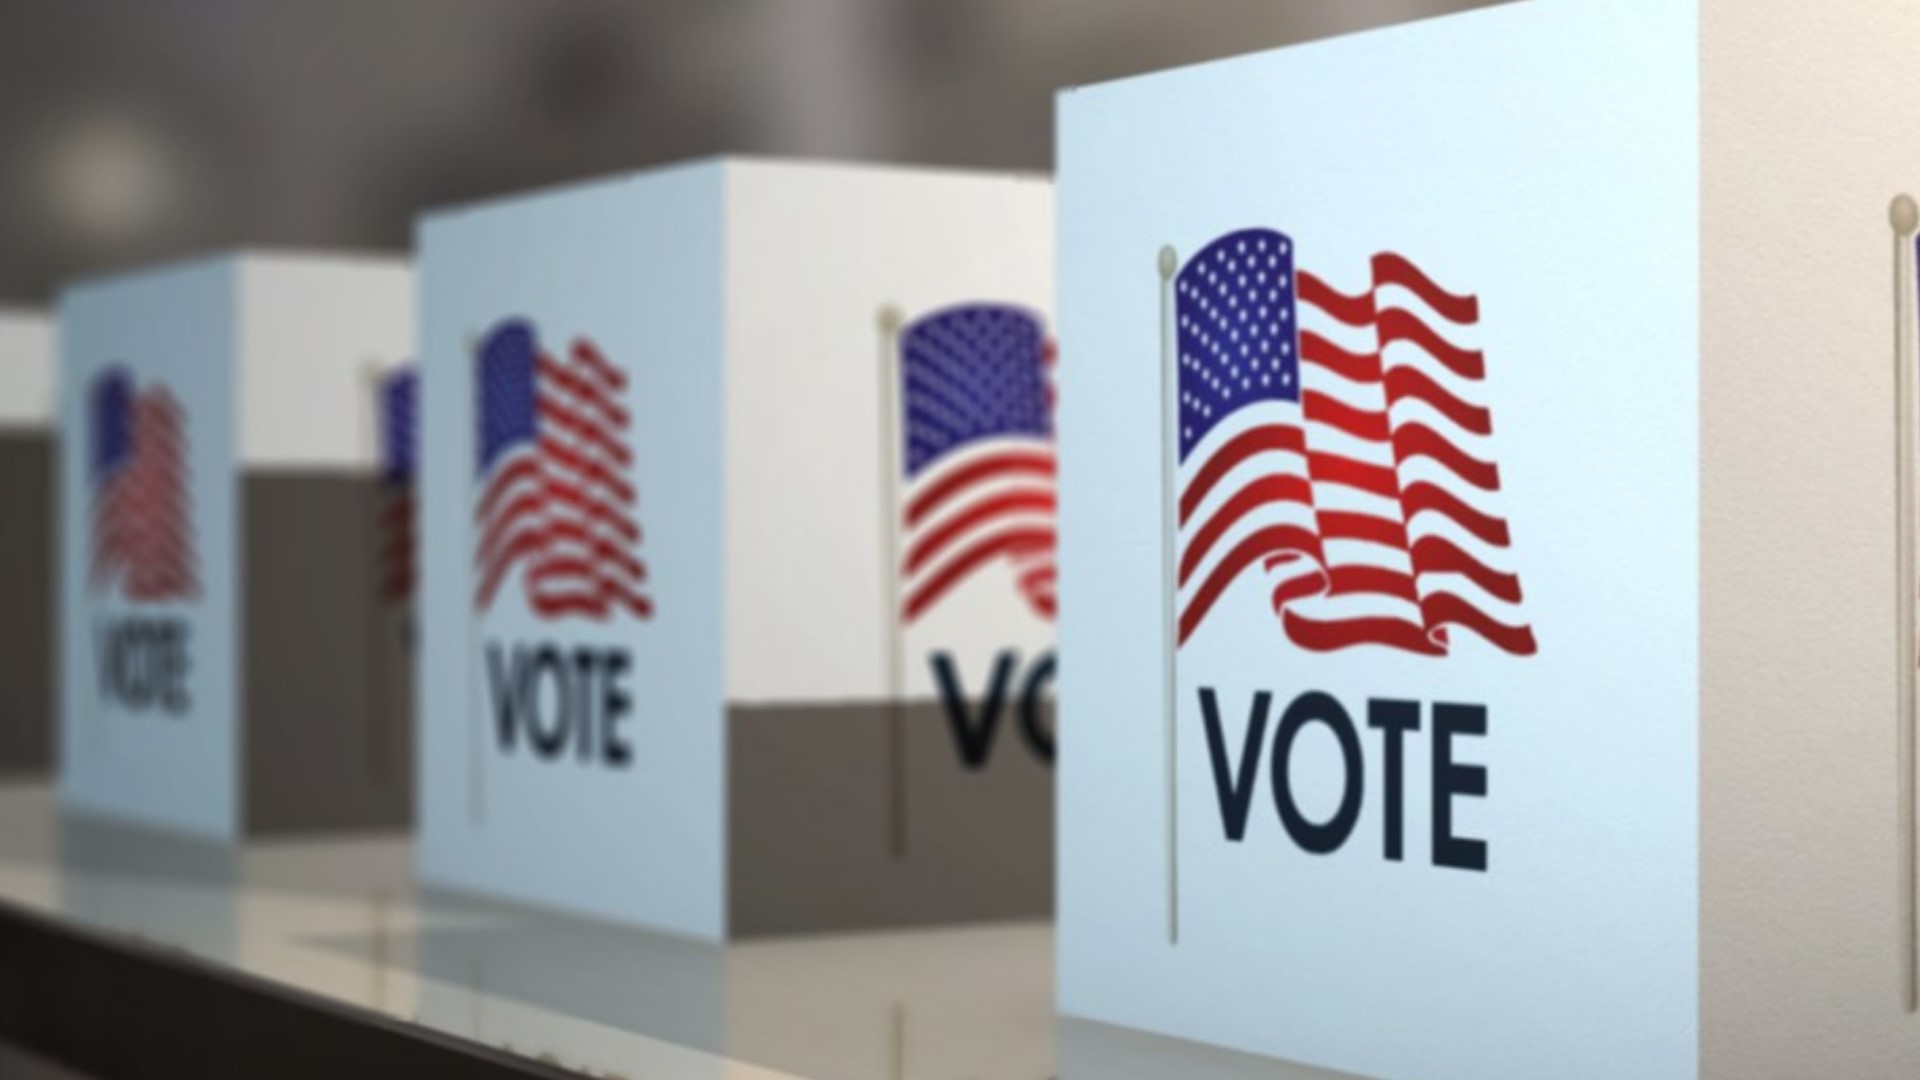 Maine to become 1st ranked-choice voting state for president | khou.com